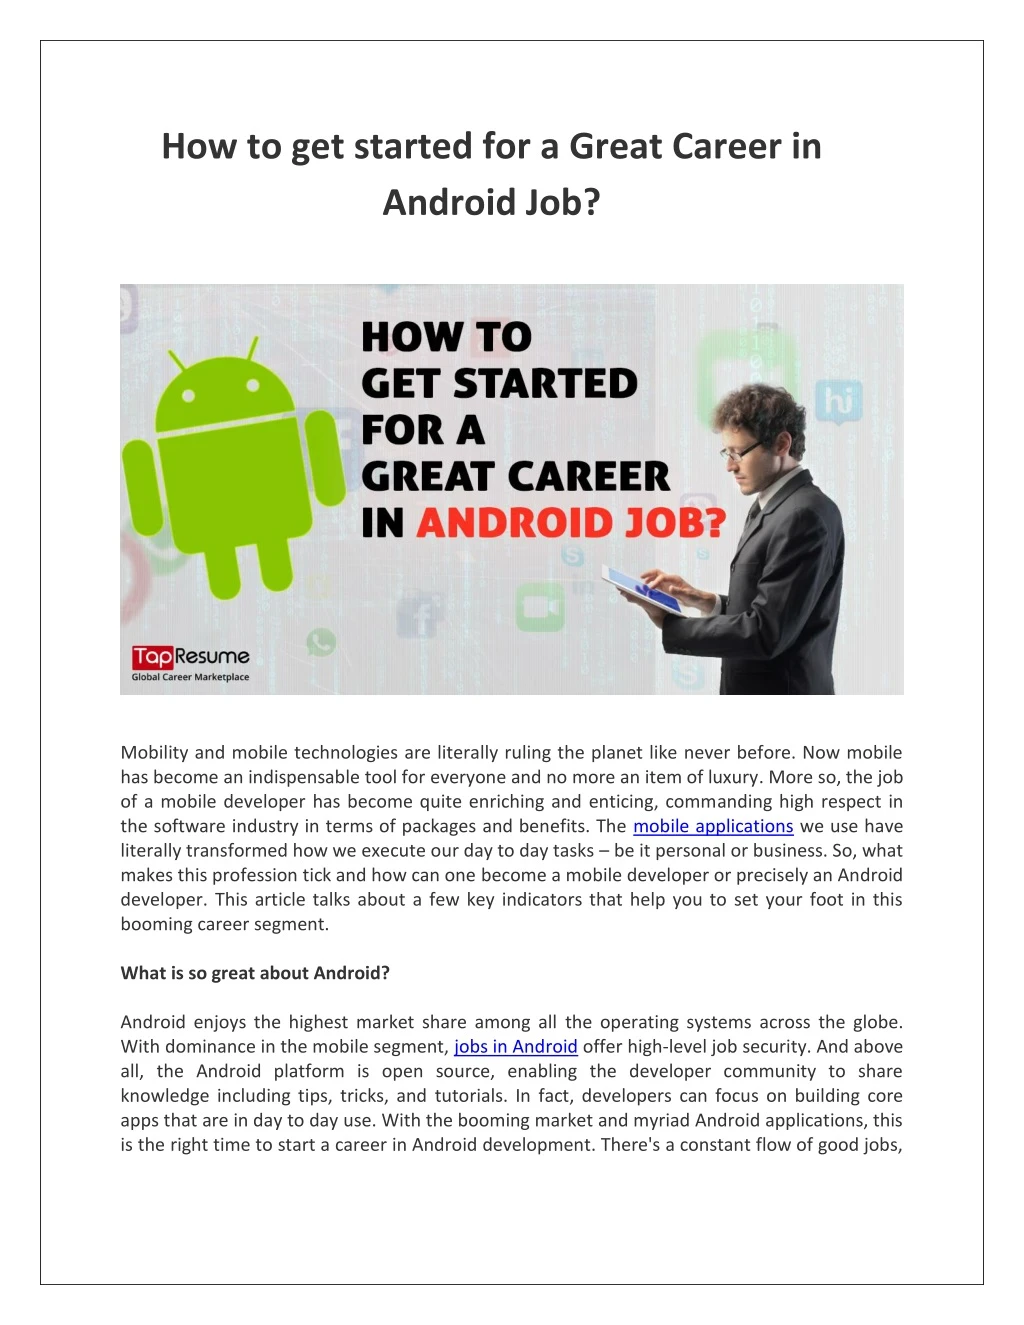 how to get started for a great career in android